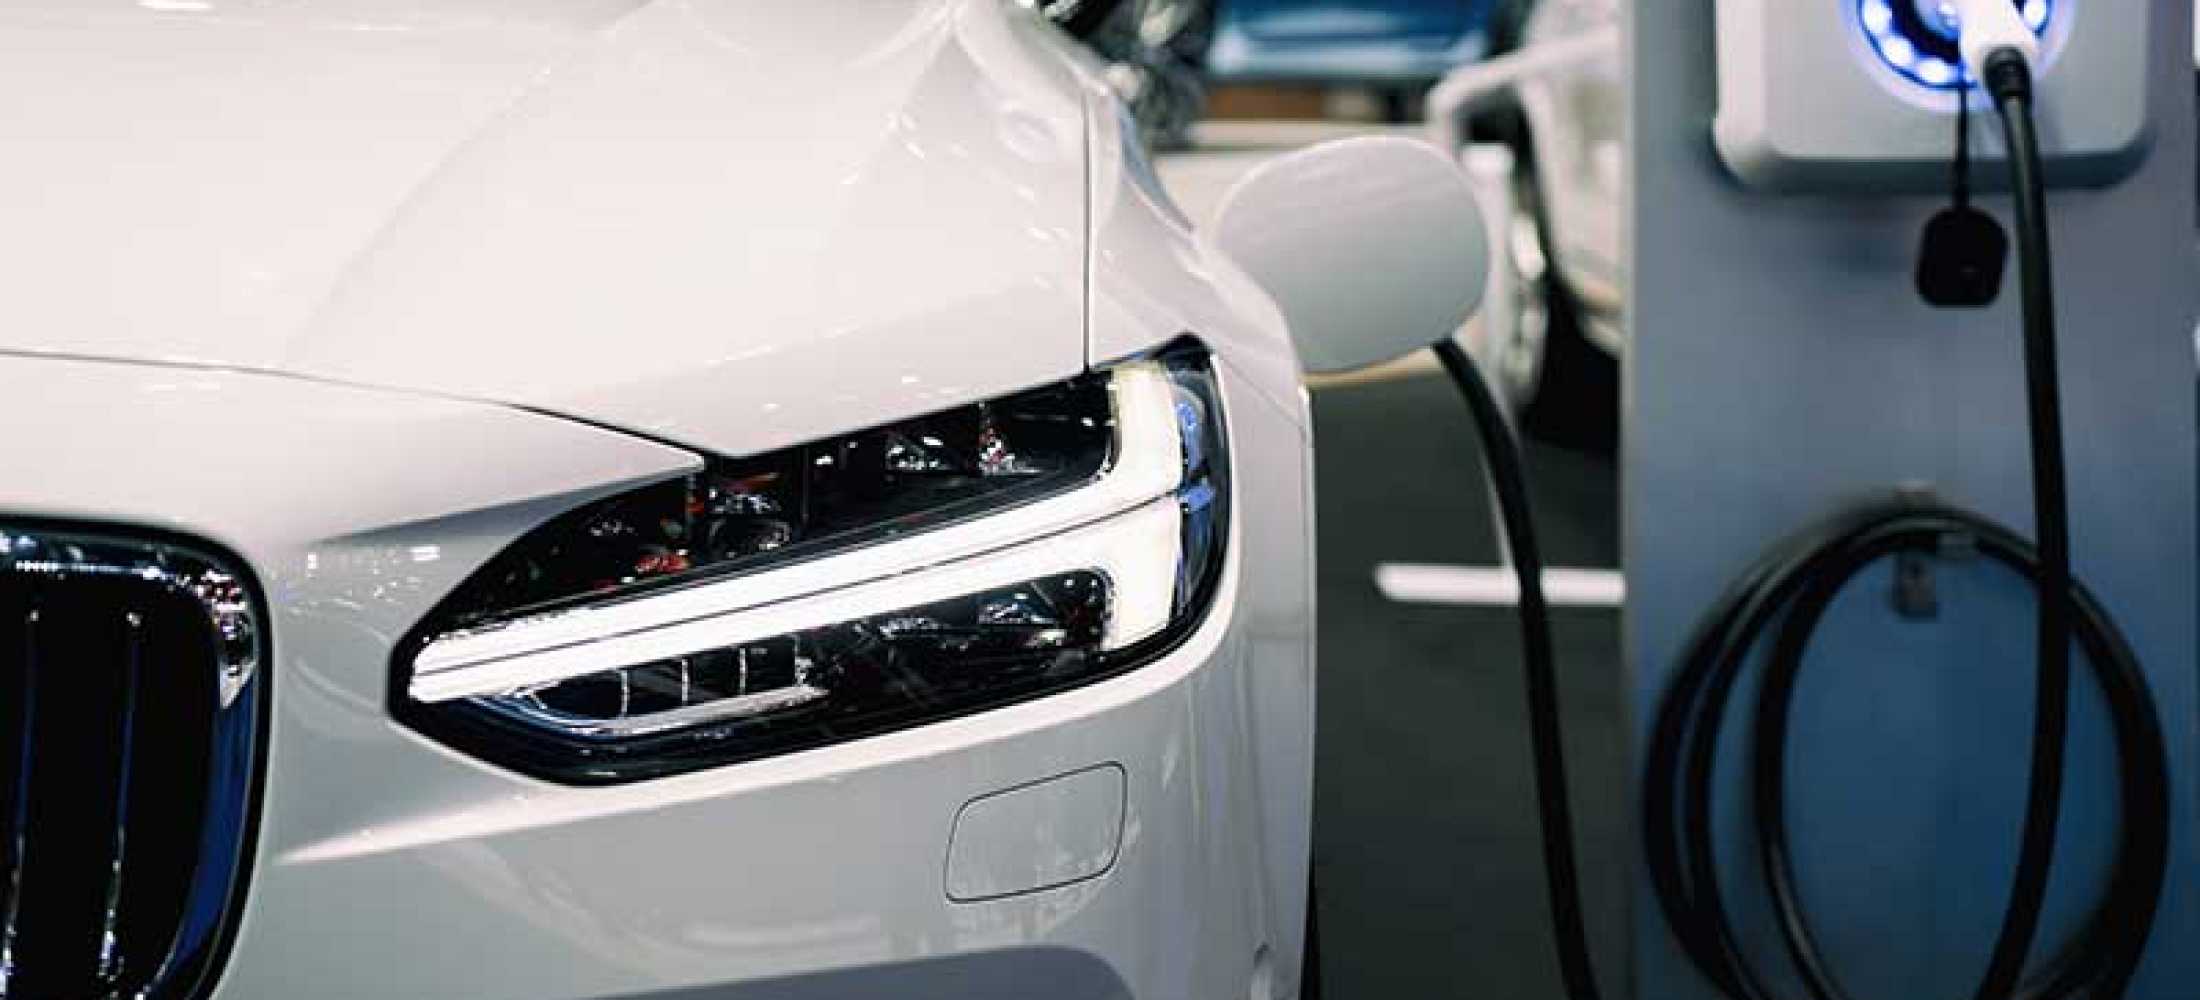 Should you buy an electric car through your company? 3 Wise Bears